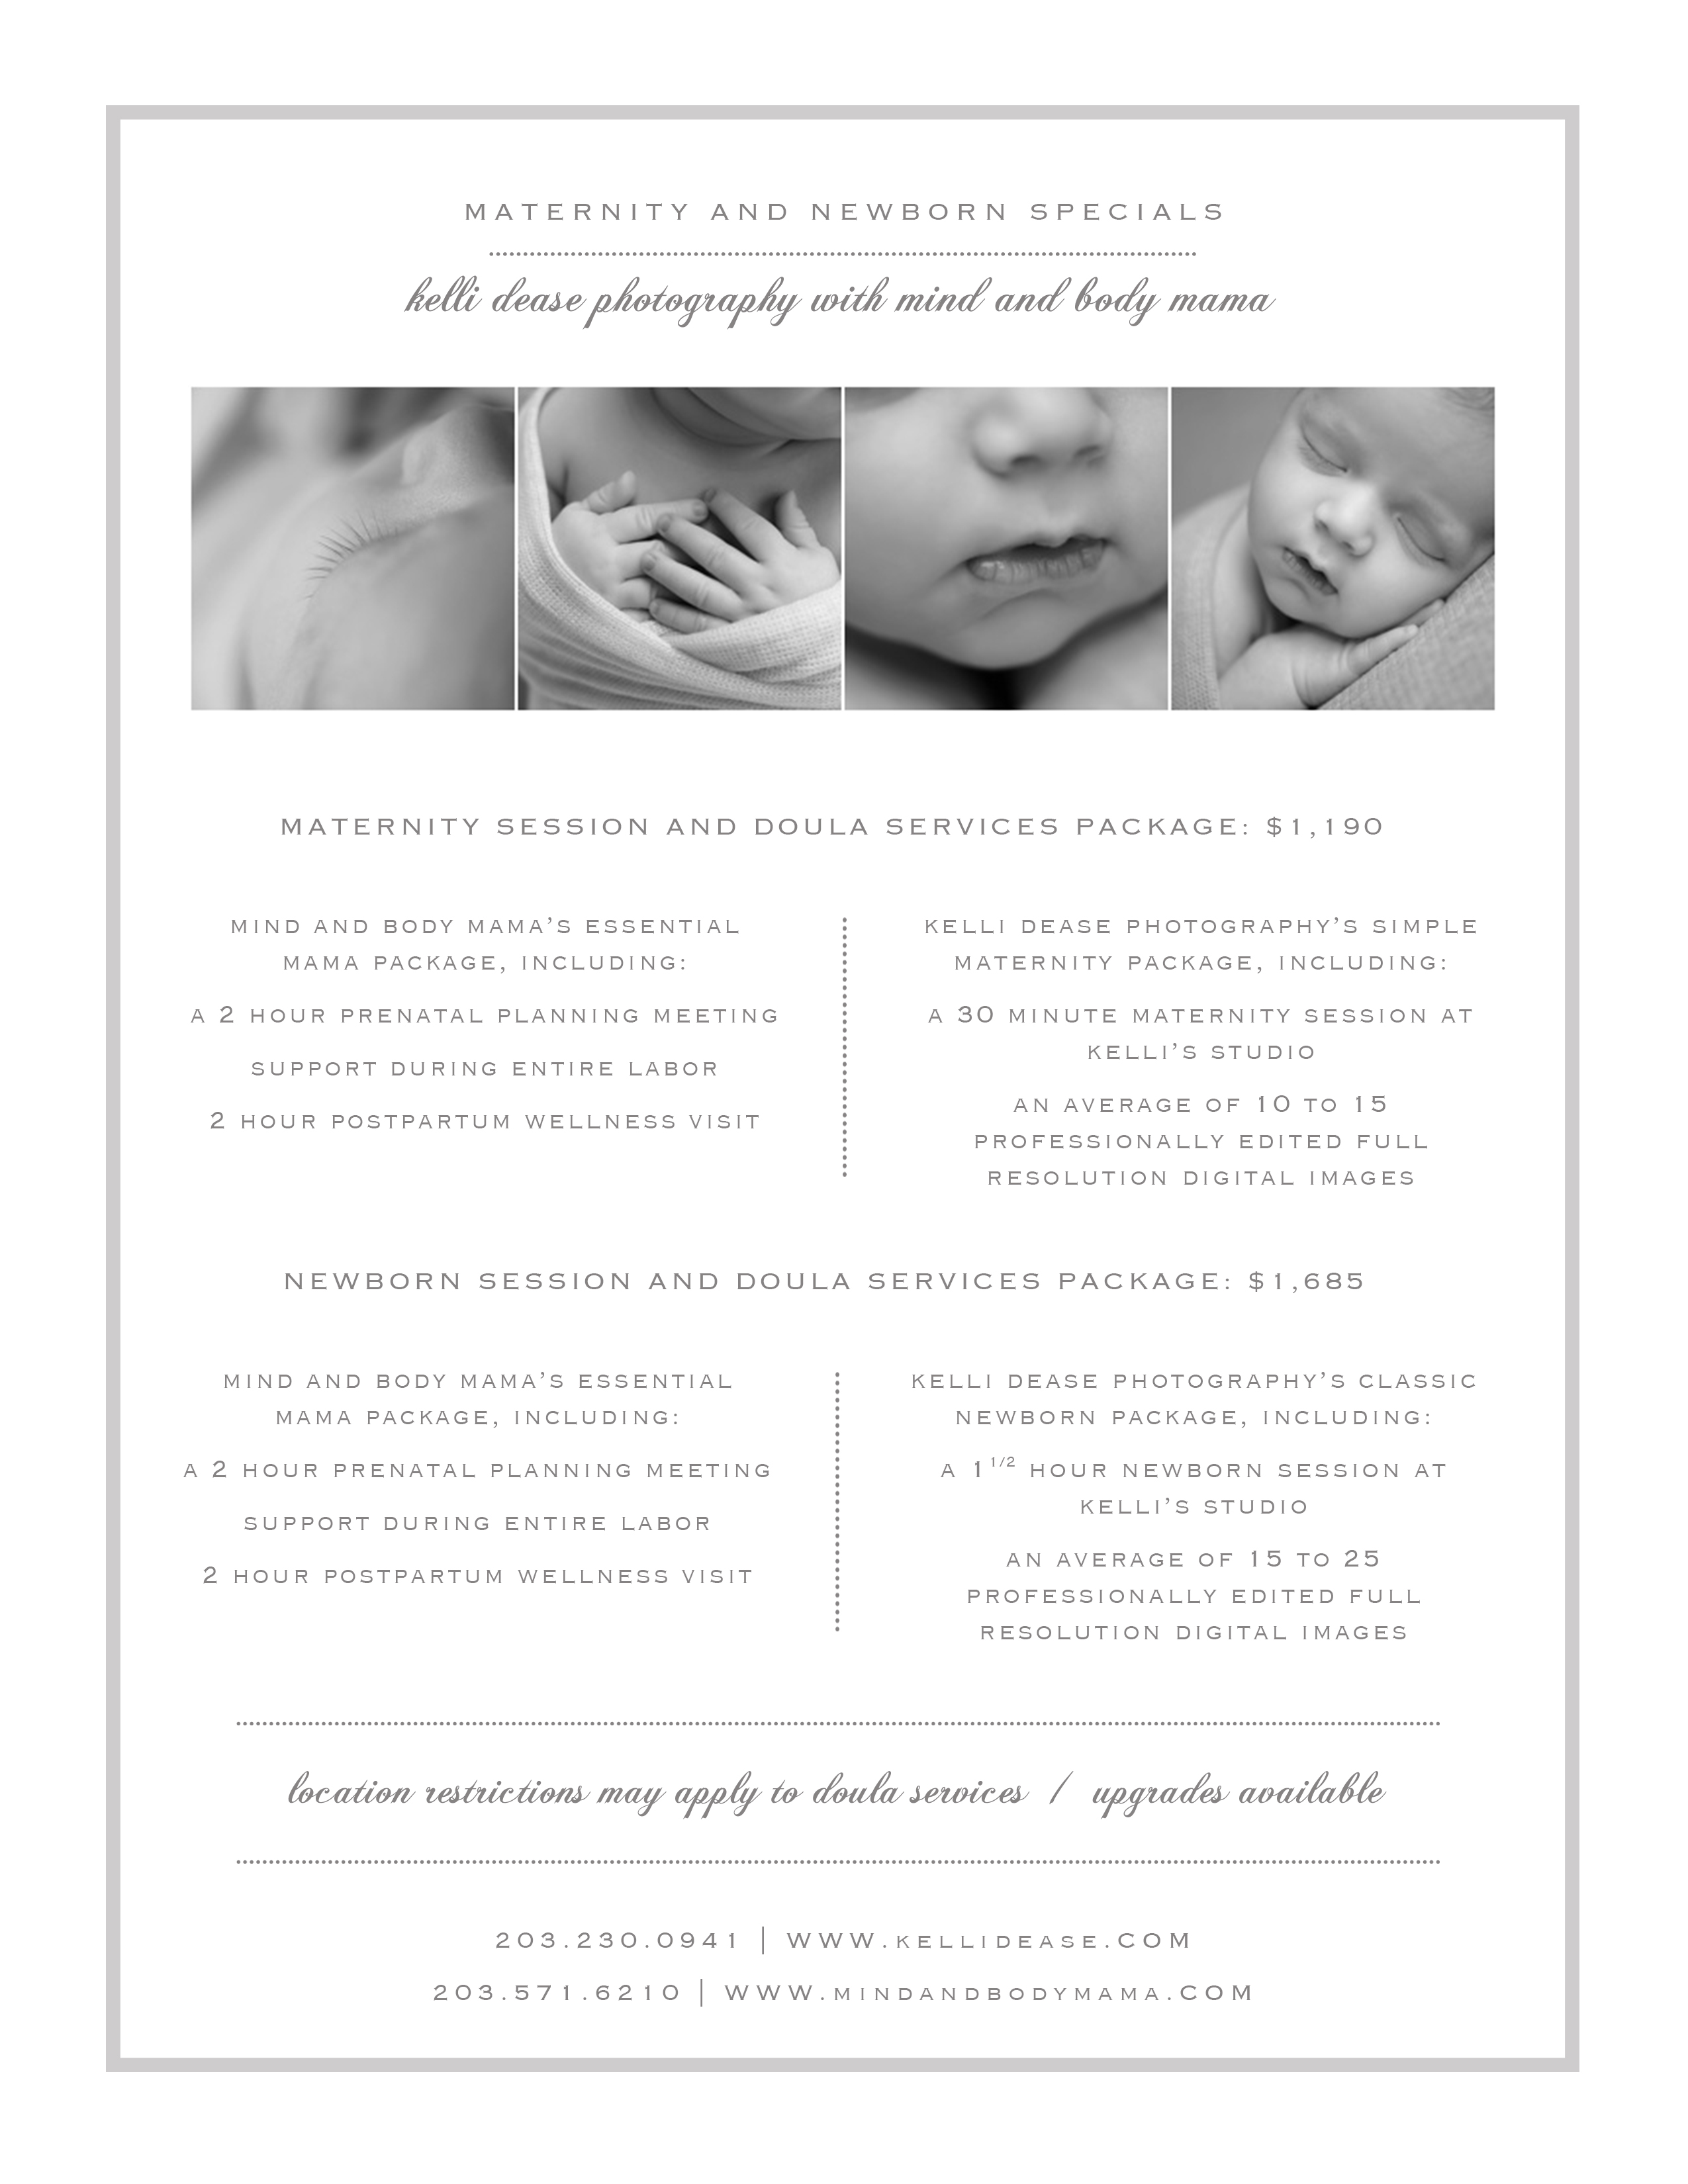 Maternity and newborn photography and doula services special package.